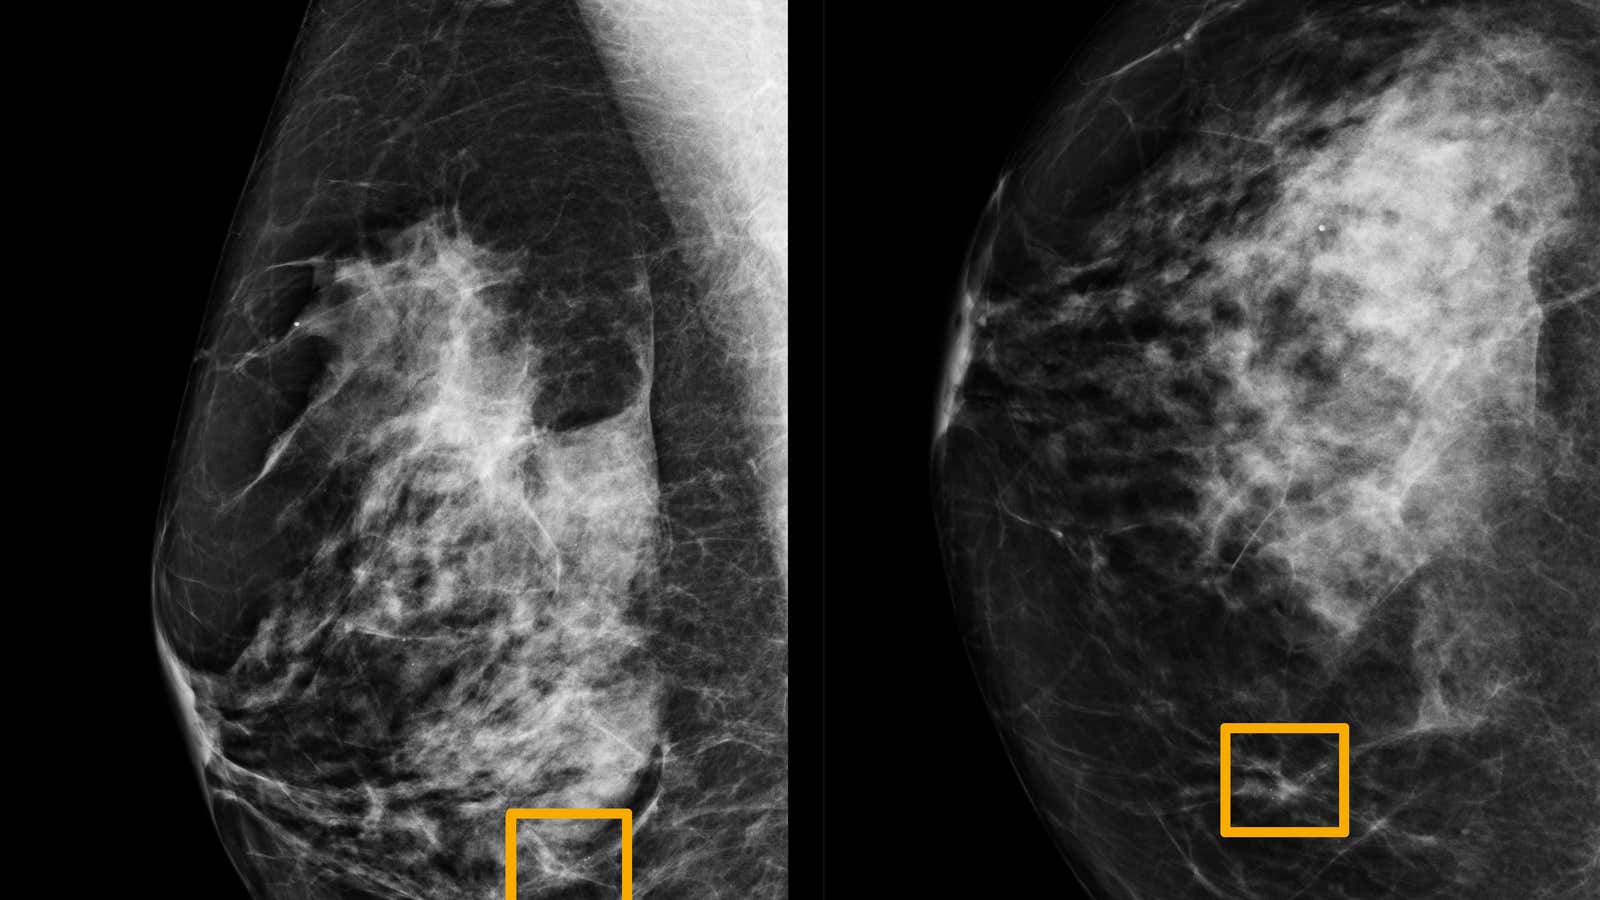 Can AI deliver a better mammogram?